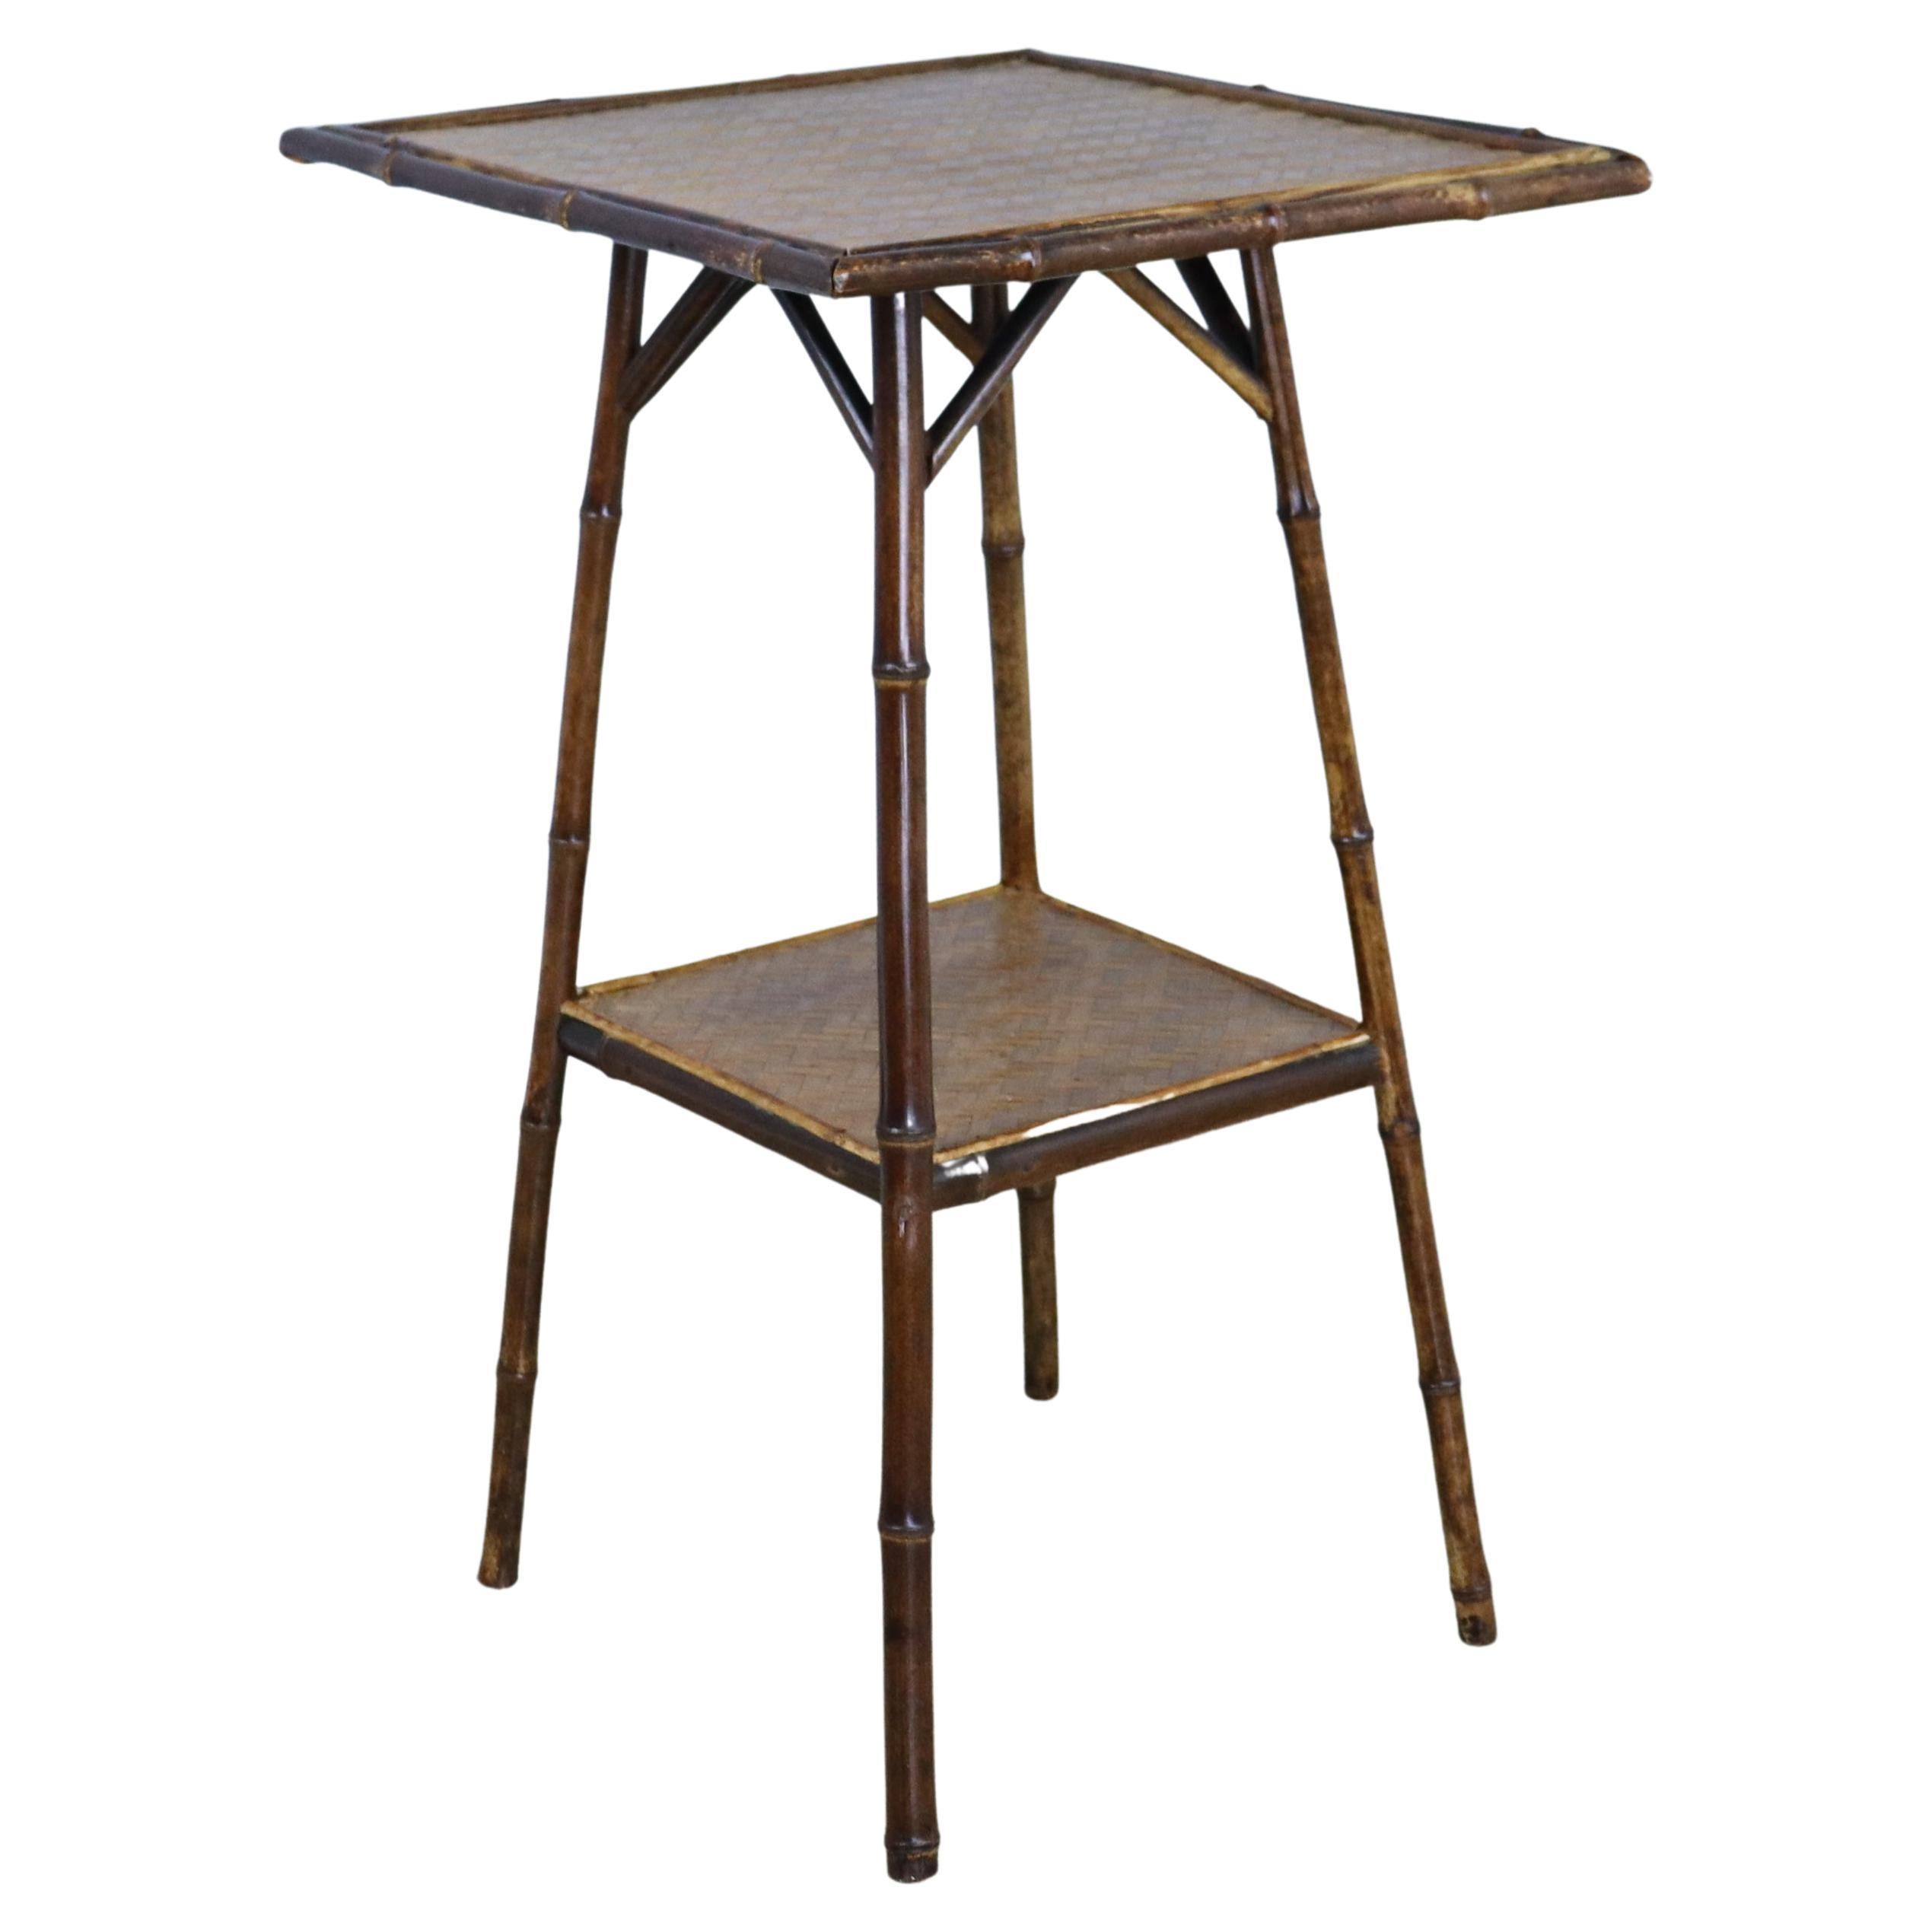 Square Top Bamboo Side Table with Lower Shelf